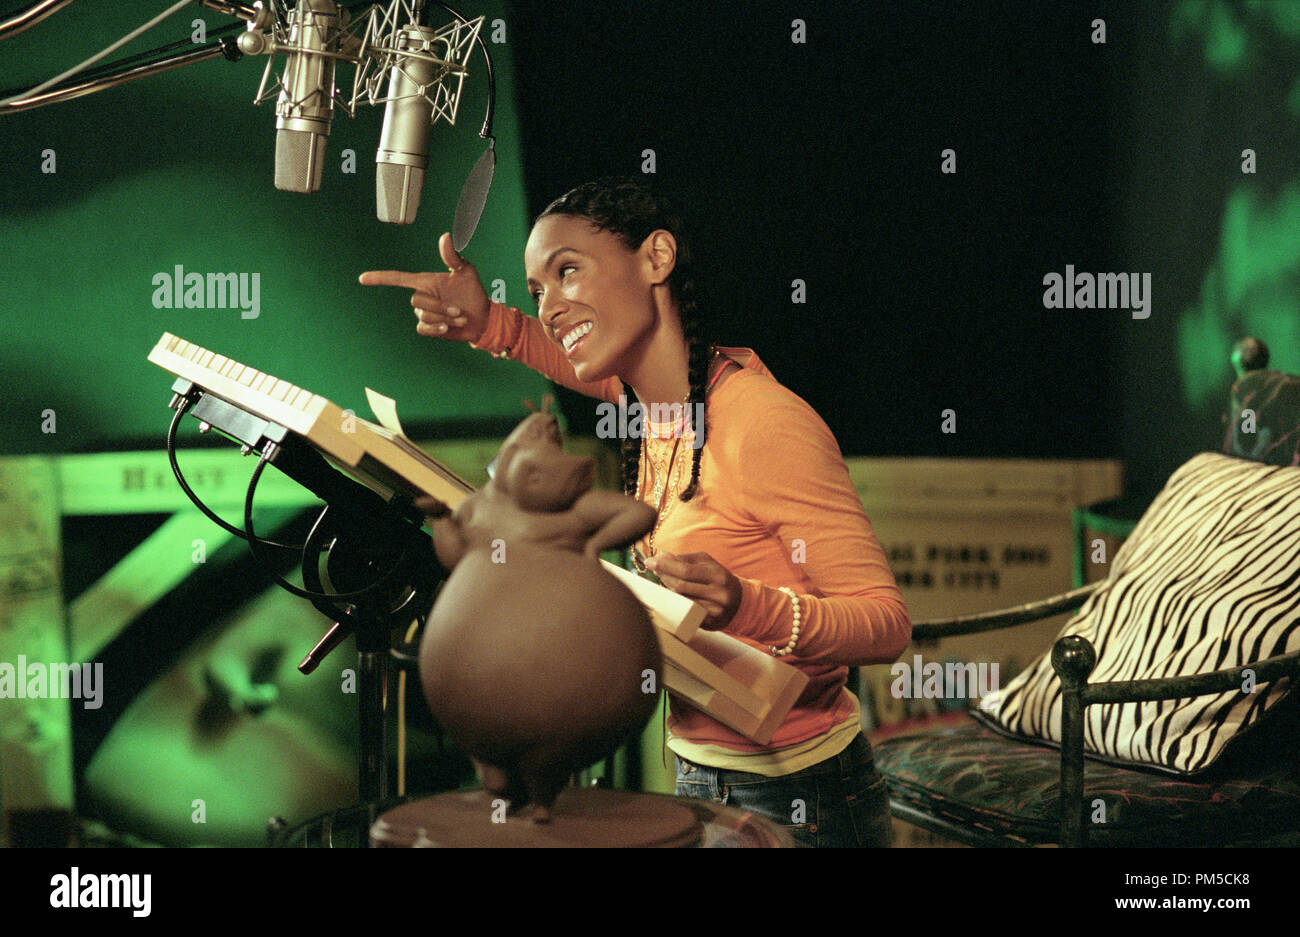 Film Still / Publicity Still from 'Madagascar'  Jada Pinkett Smith © 2005 Dream Works  Photo courtesy Dream Works Animation SKG    File Reference # 307361116THA  For Editorial Use Only -  All Rights Reserved Stock Photo